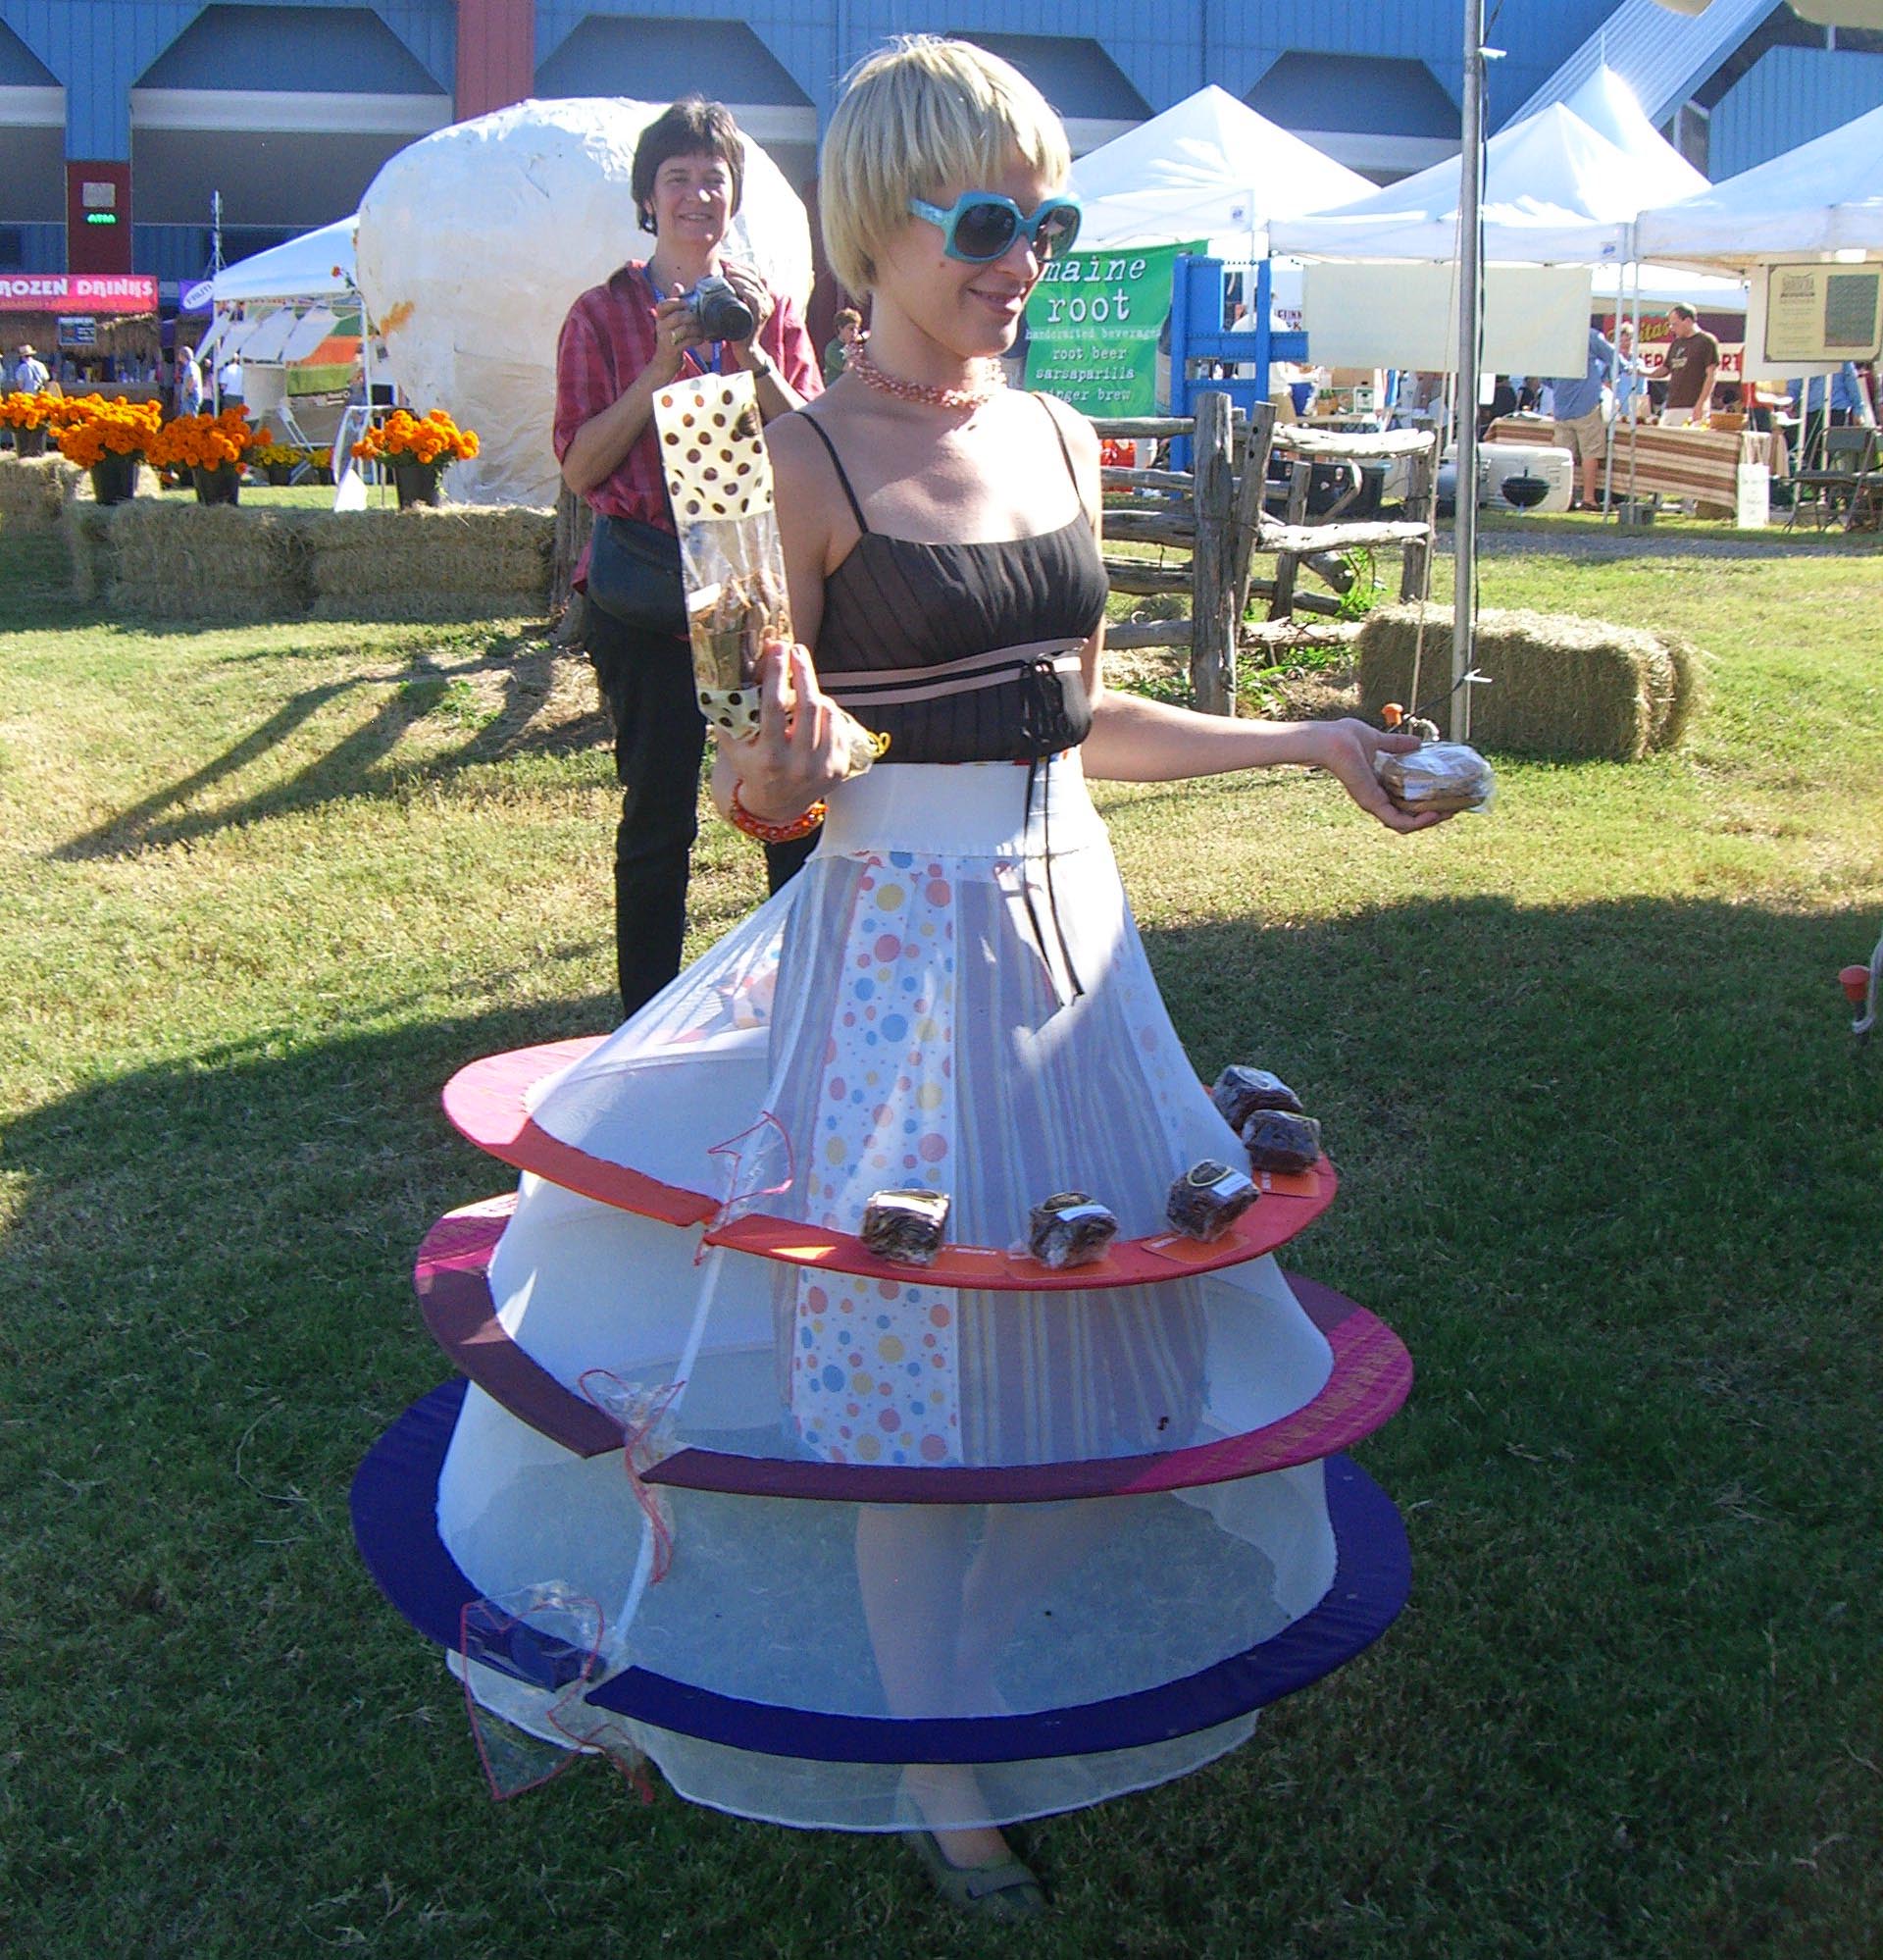 A cake stand dress with a hem that can be used to serve pastries